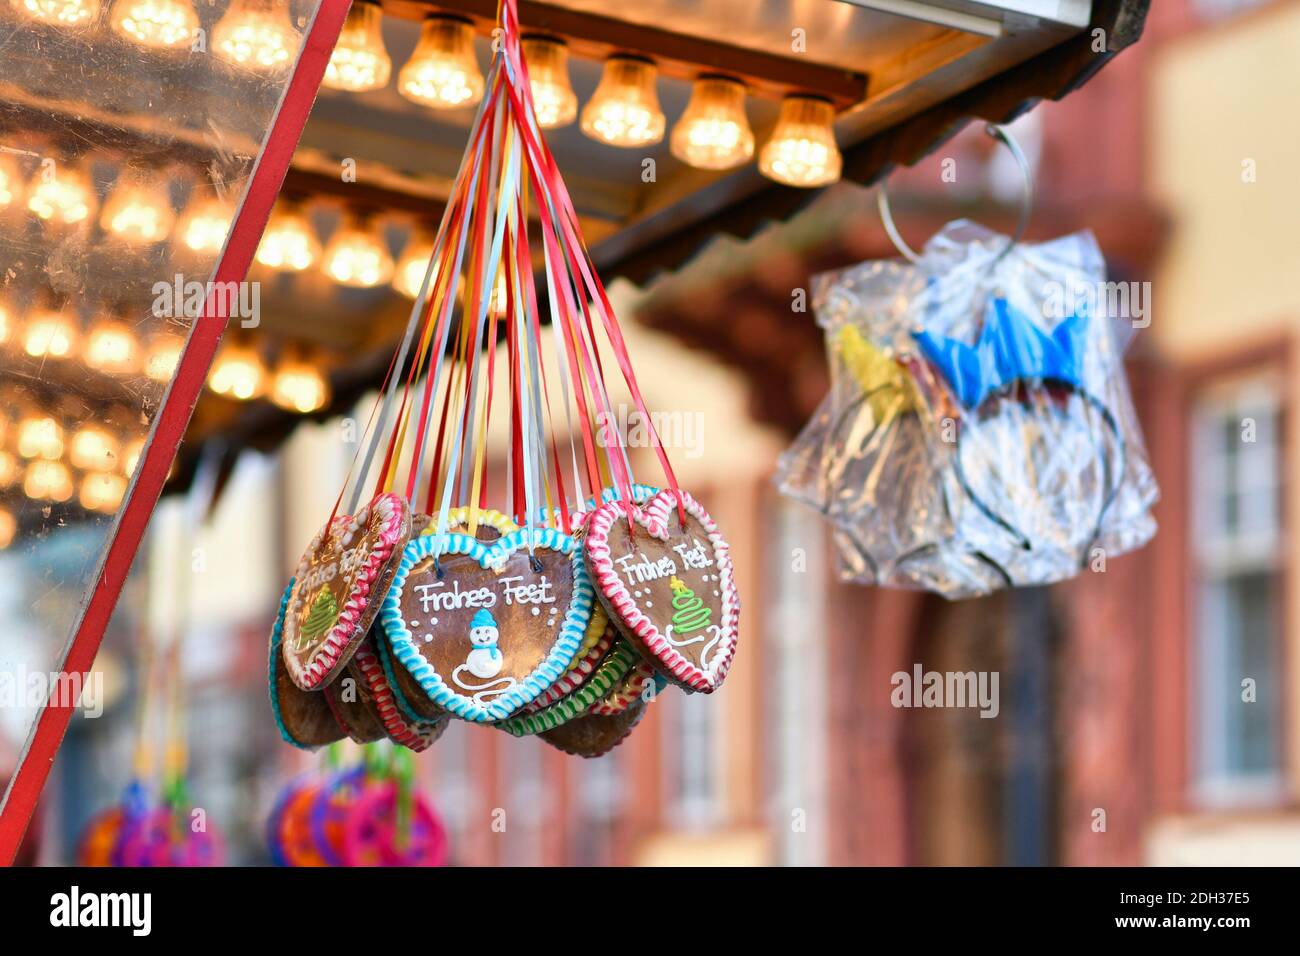 Heidelberg, Germany - December 2020: Heart shaped gingerbread candy with sugar icing and  German text  'Happy Holiday' hanging at Christmas market Stock Photo